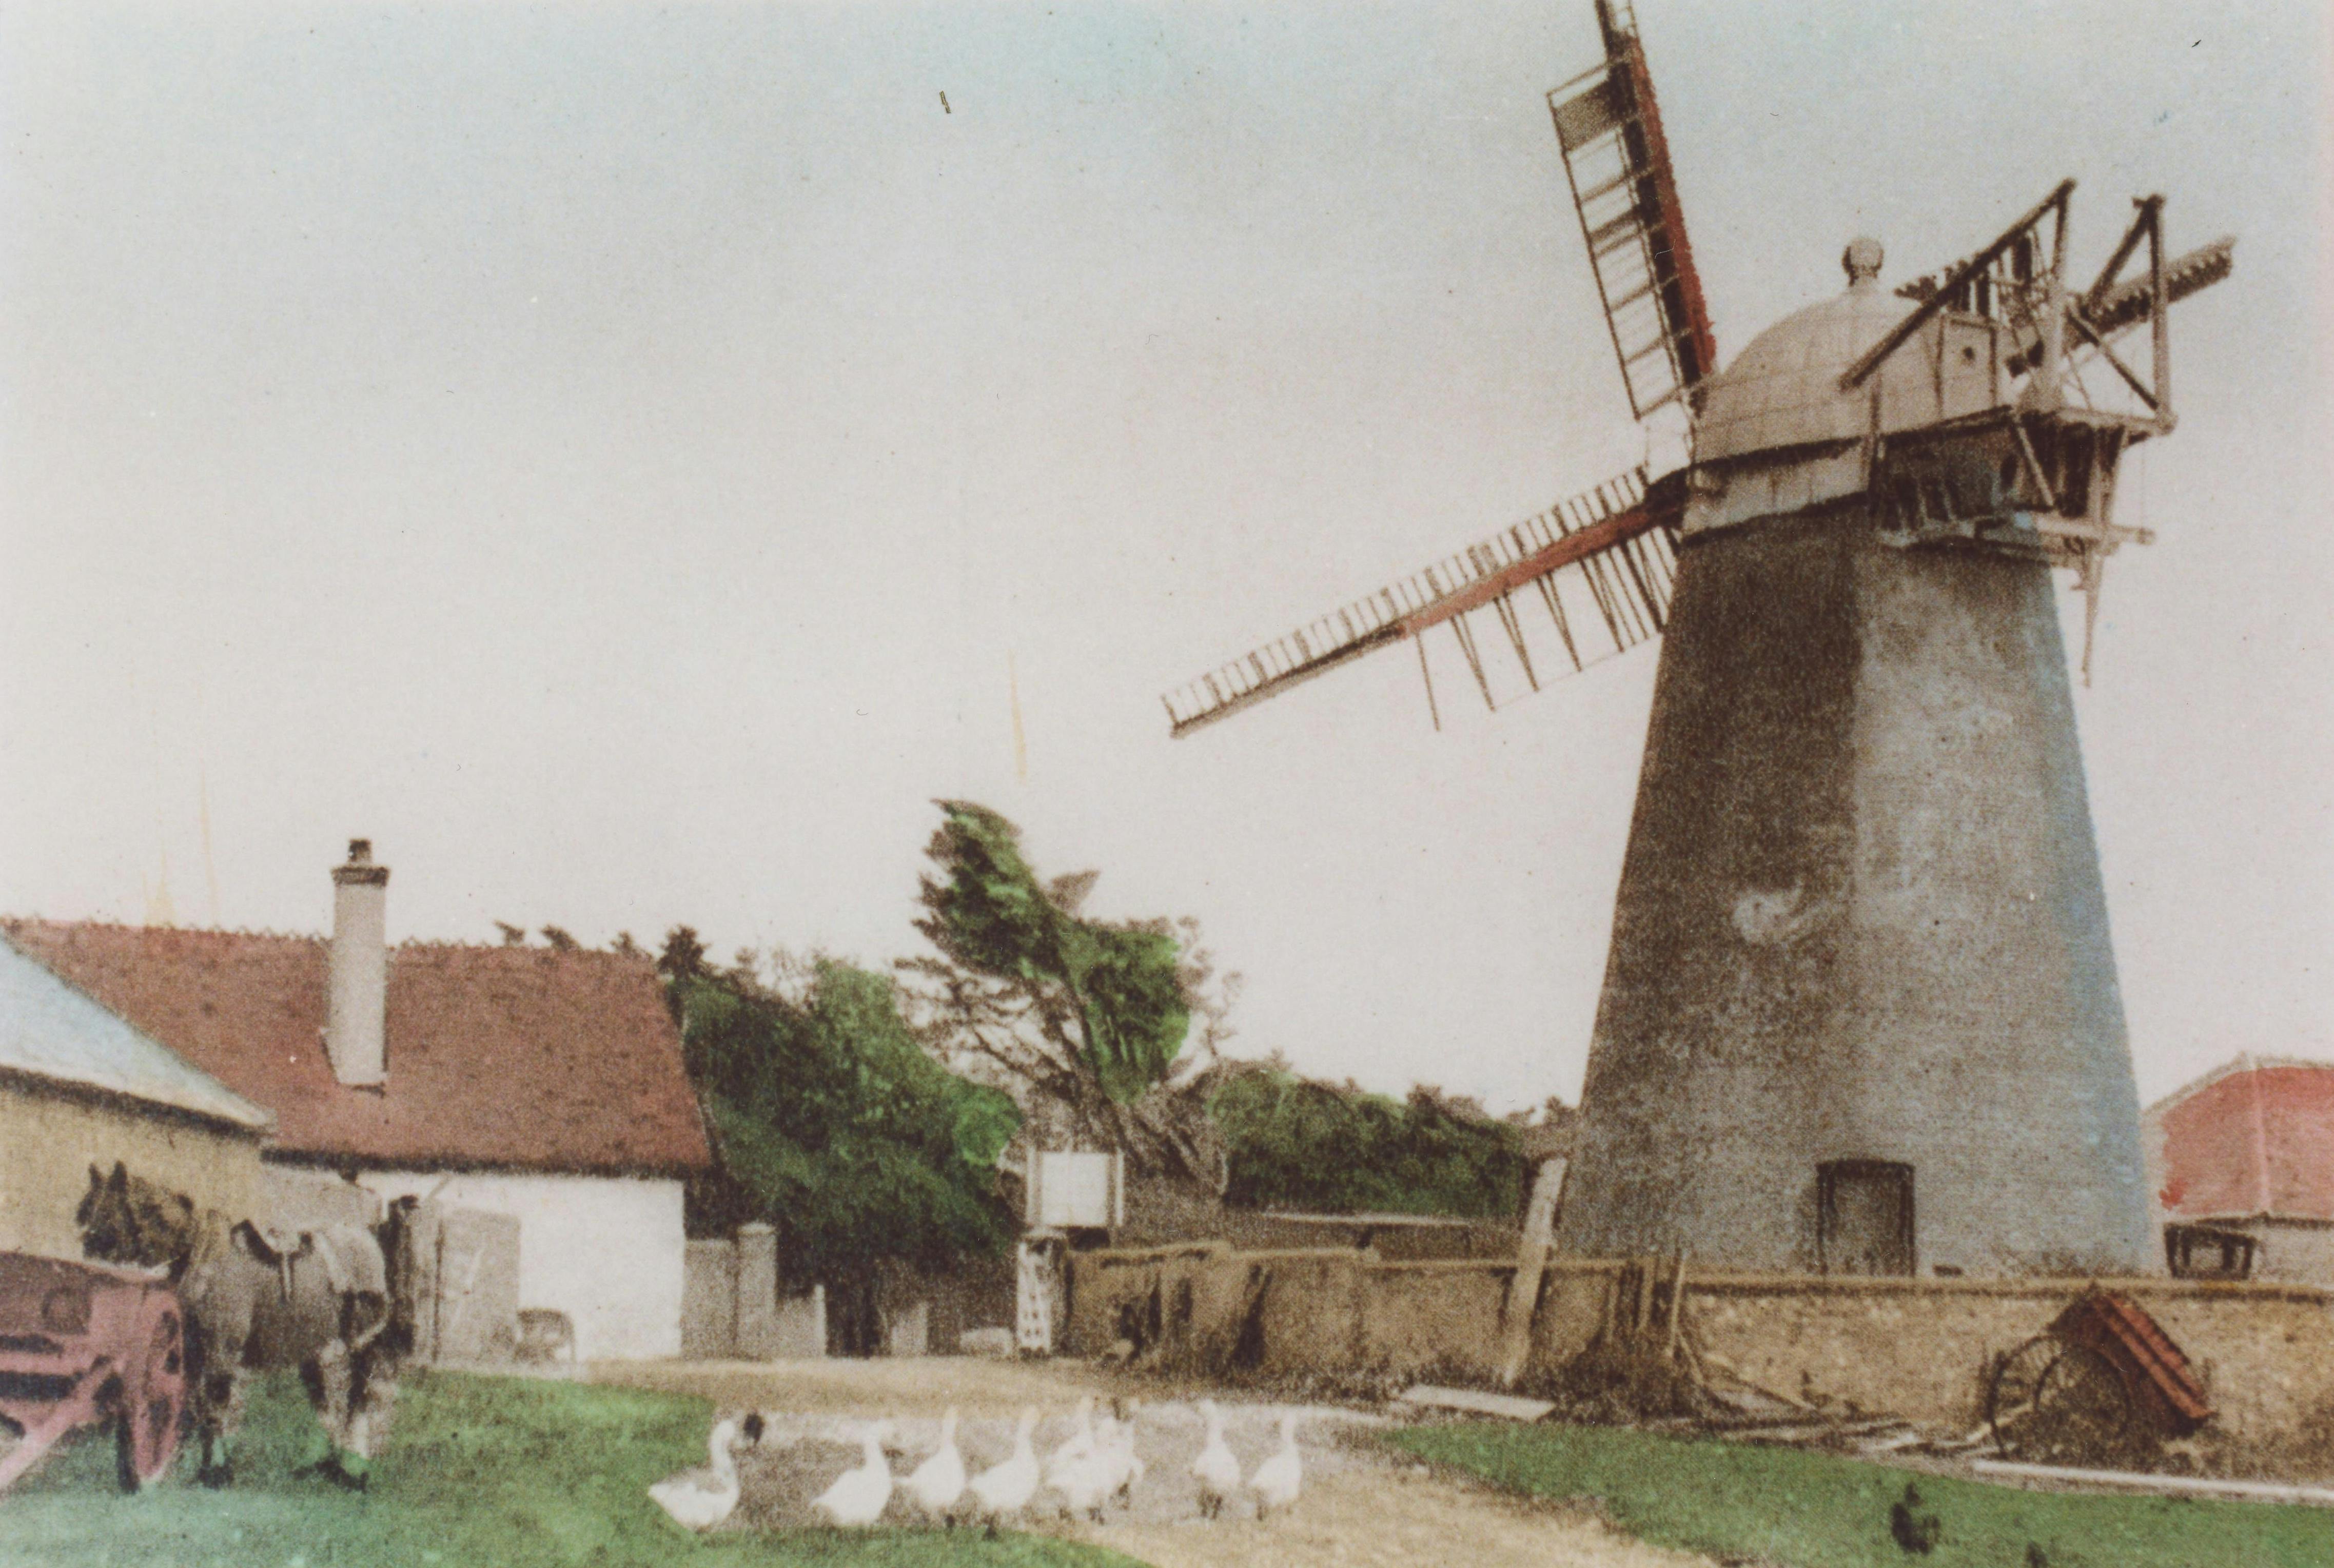 Medmerry Mill at the turn of the 20th Century coloured image with geece and horse